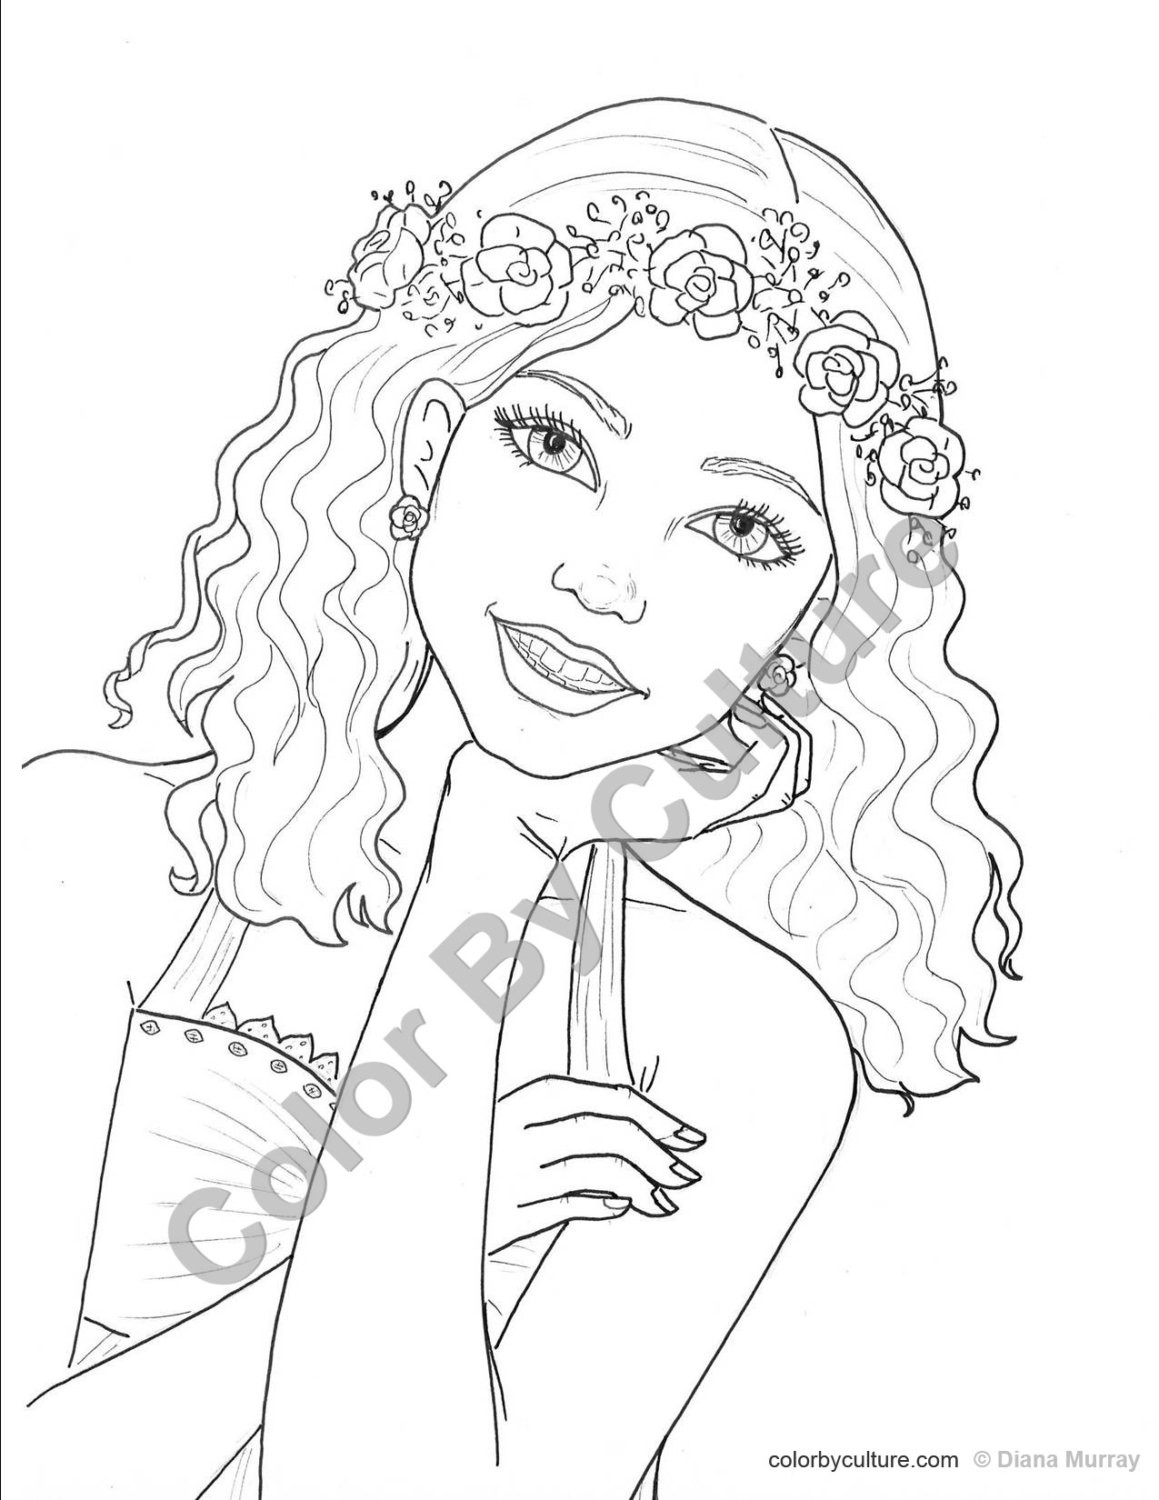 Coloring Pages For Girls Teens
 Fashion Coloring Page Girl with Flower Wreath Coloring Page